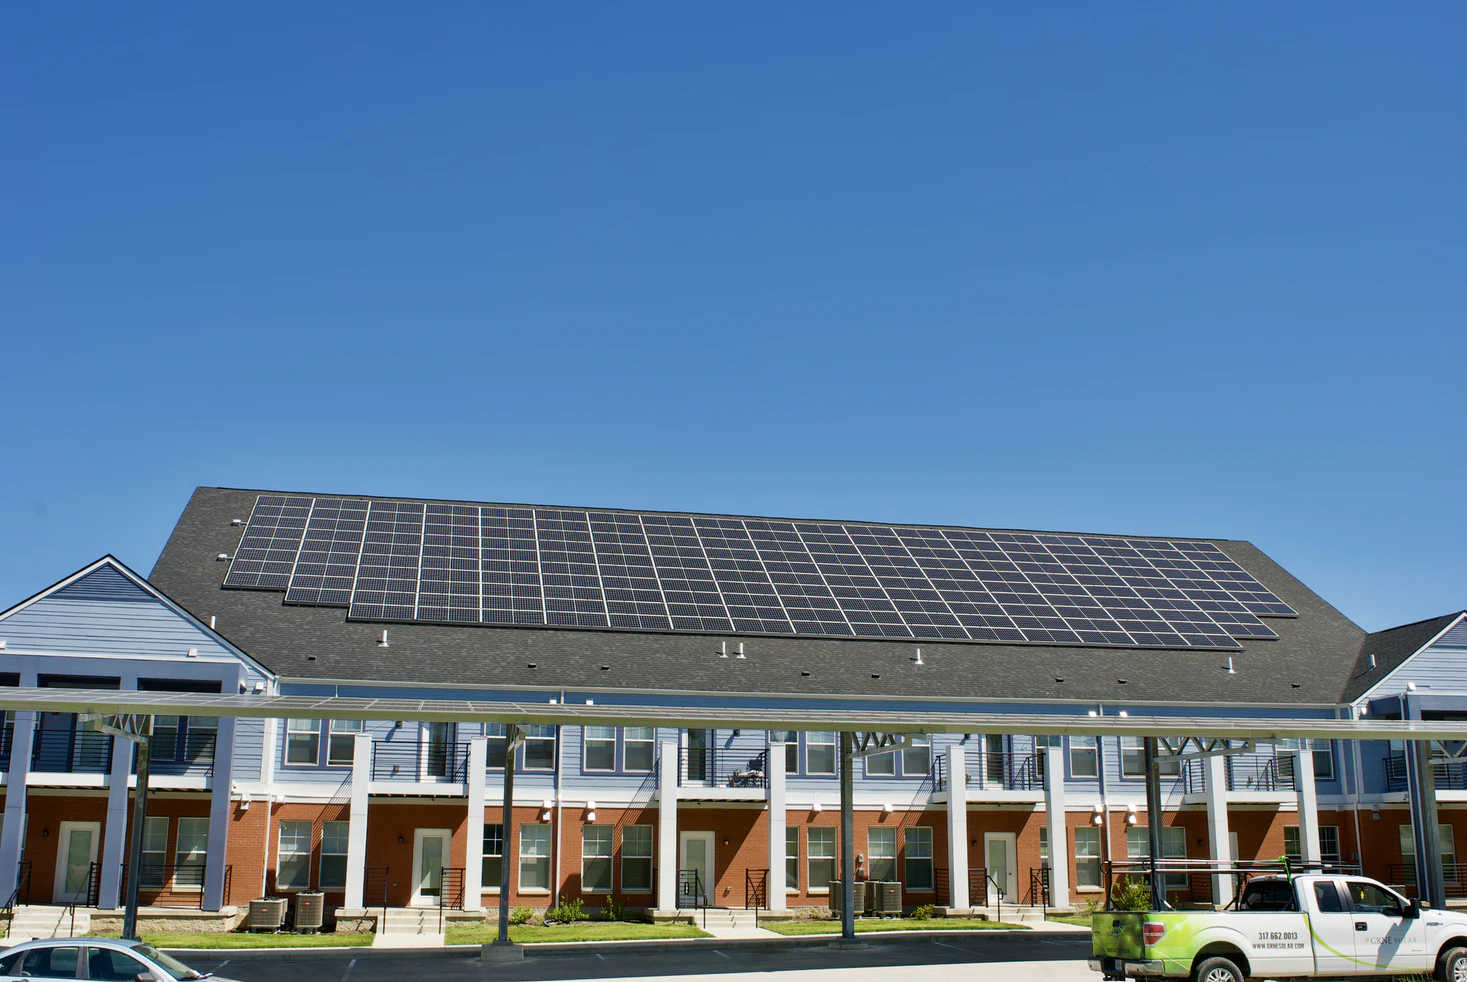 Solar panels on a building 